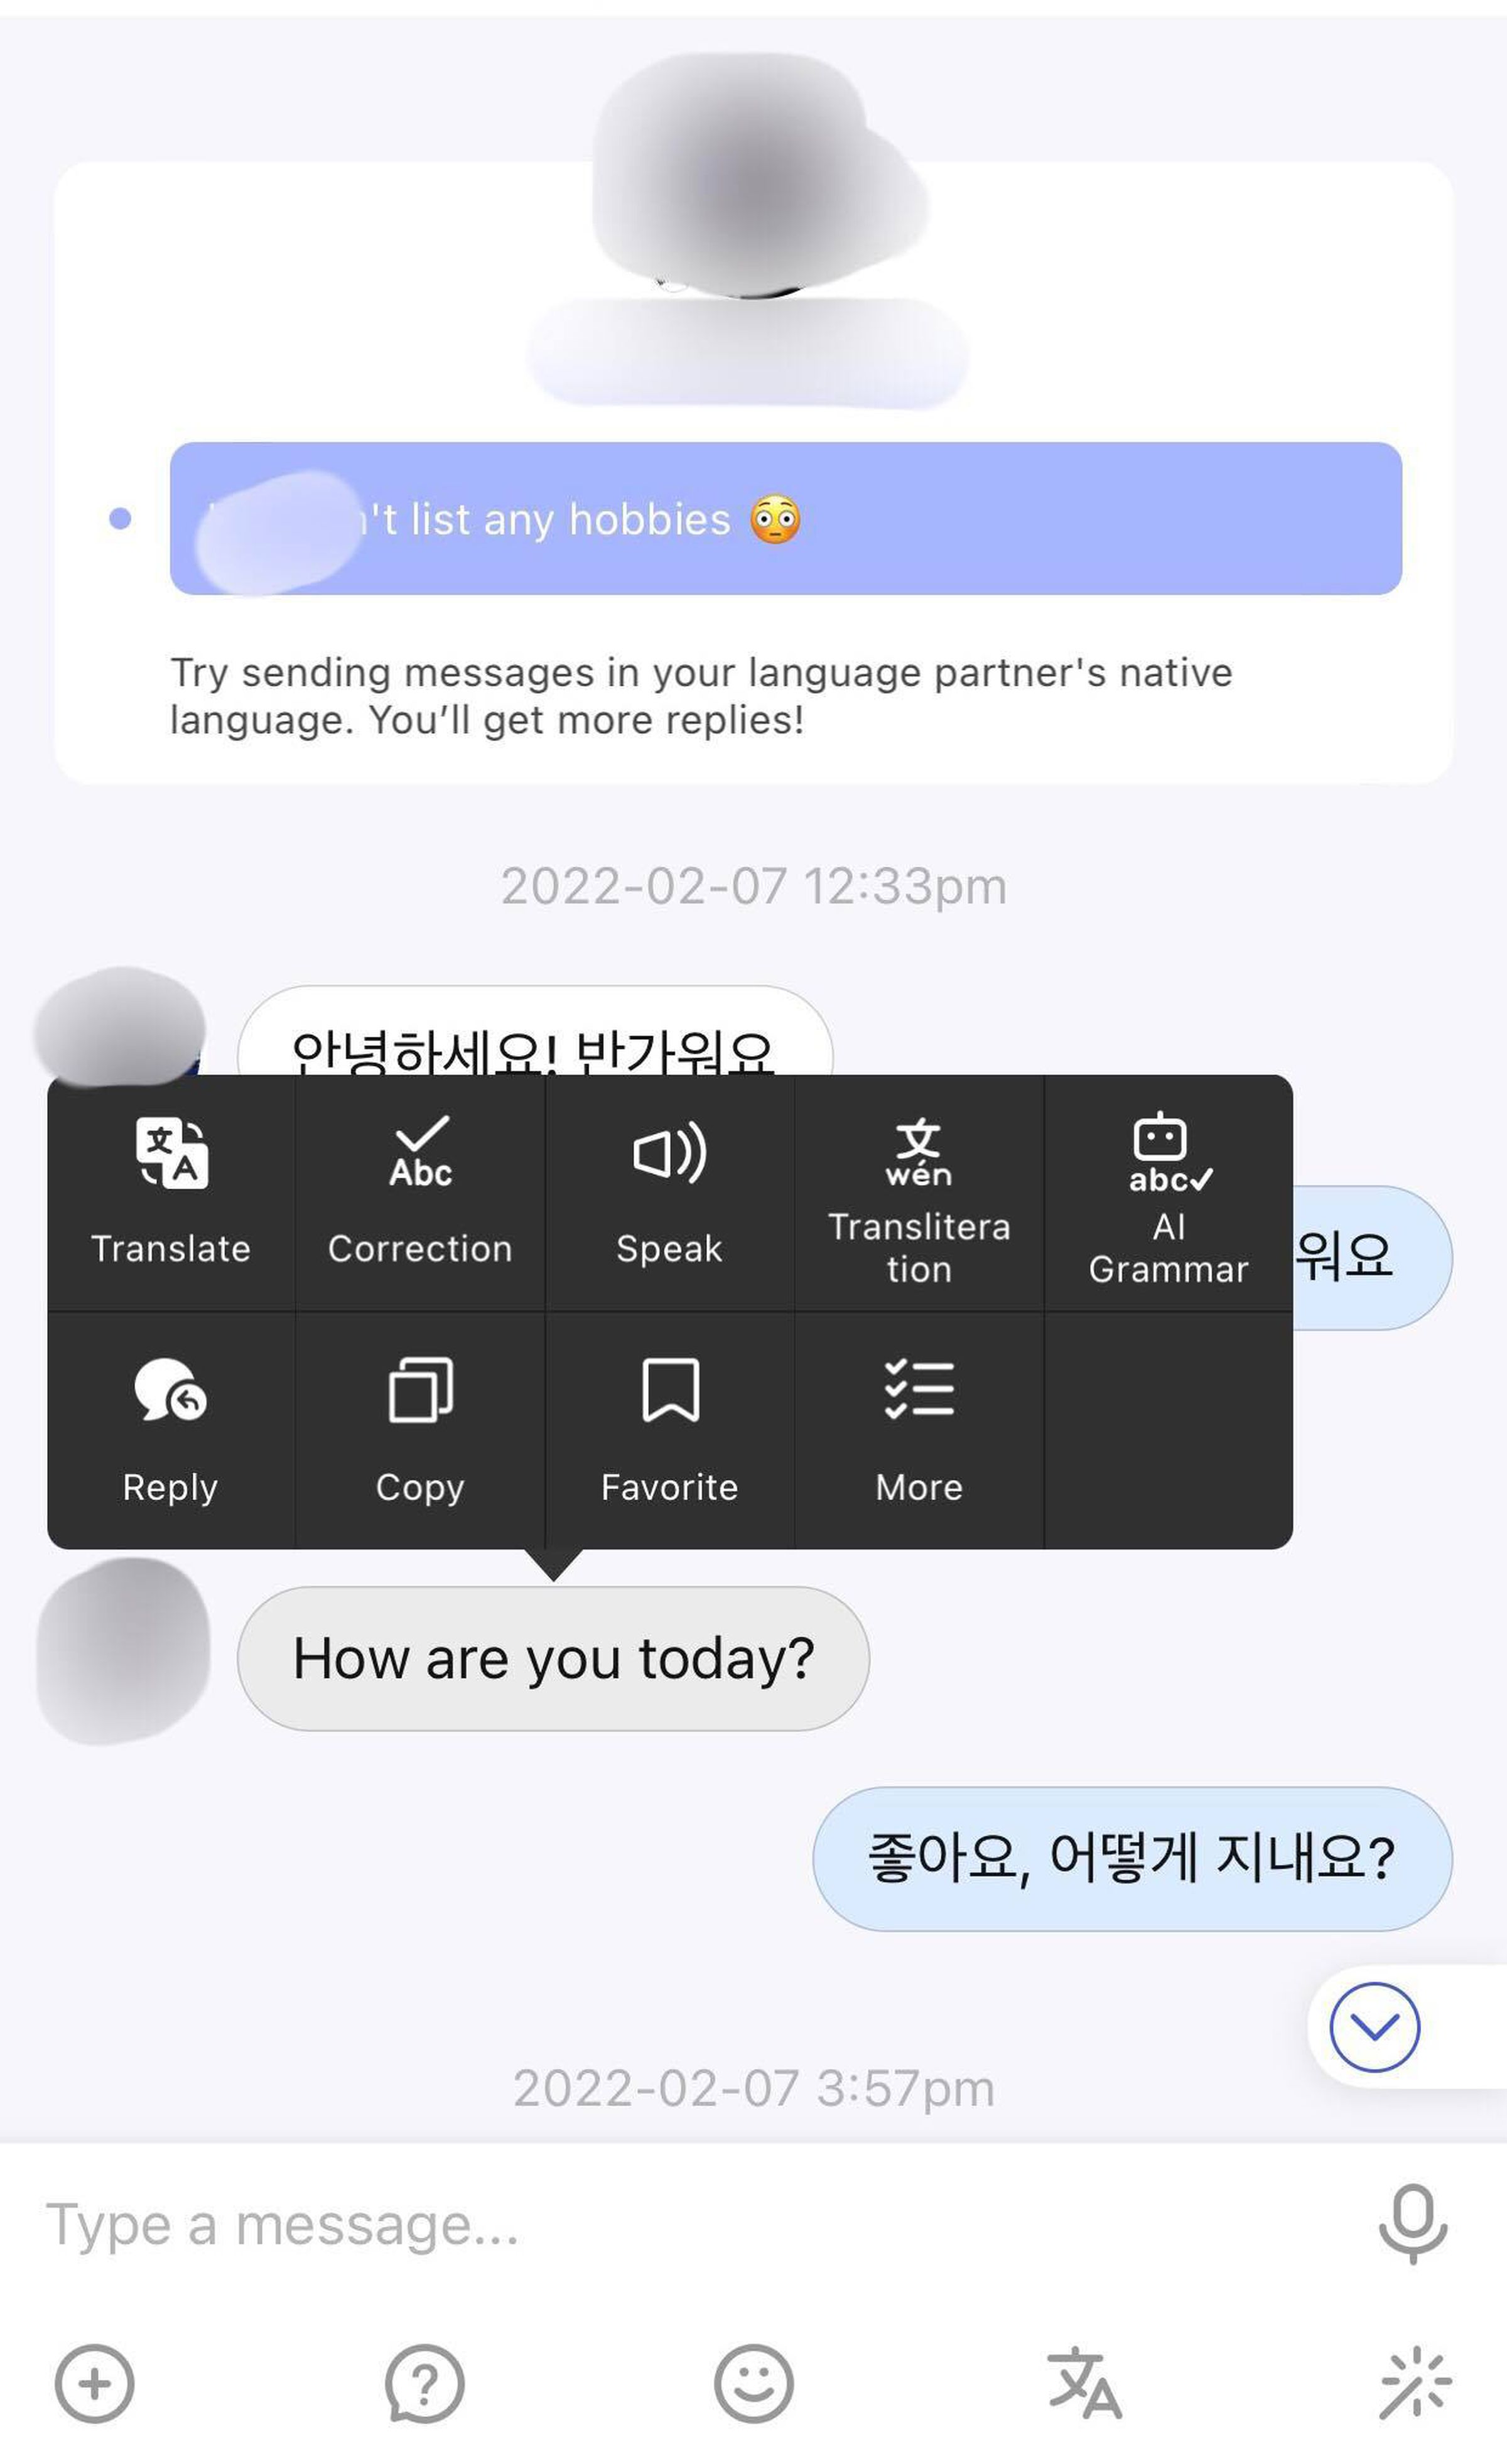 A screenshot of a conversation in the HelloTalk app. A menu hovers above one selected message including options for Translate, Correction, Speak, Transliteration, AI Grammar, Reply, Copy, Favorite, and More.